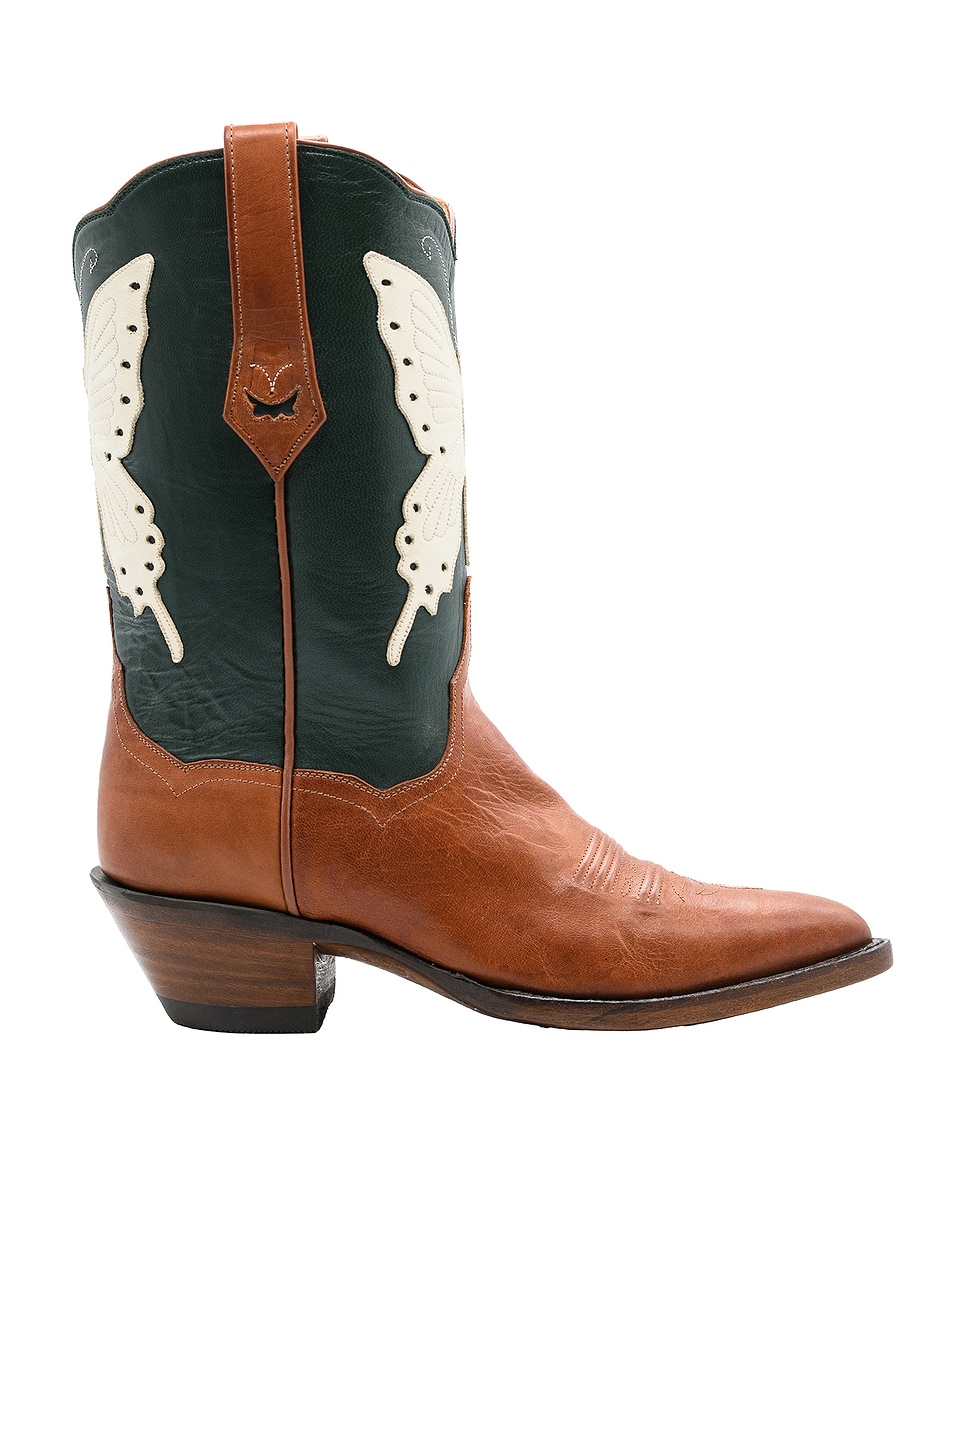 Image 1 of Kemo Sabe Swallow Tail Butterfly Boot in Cognac